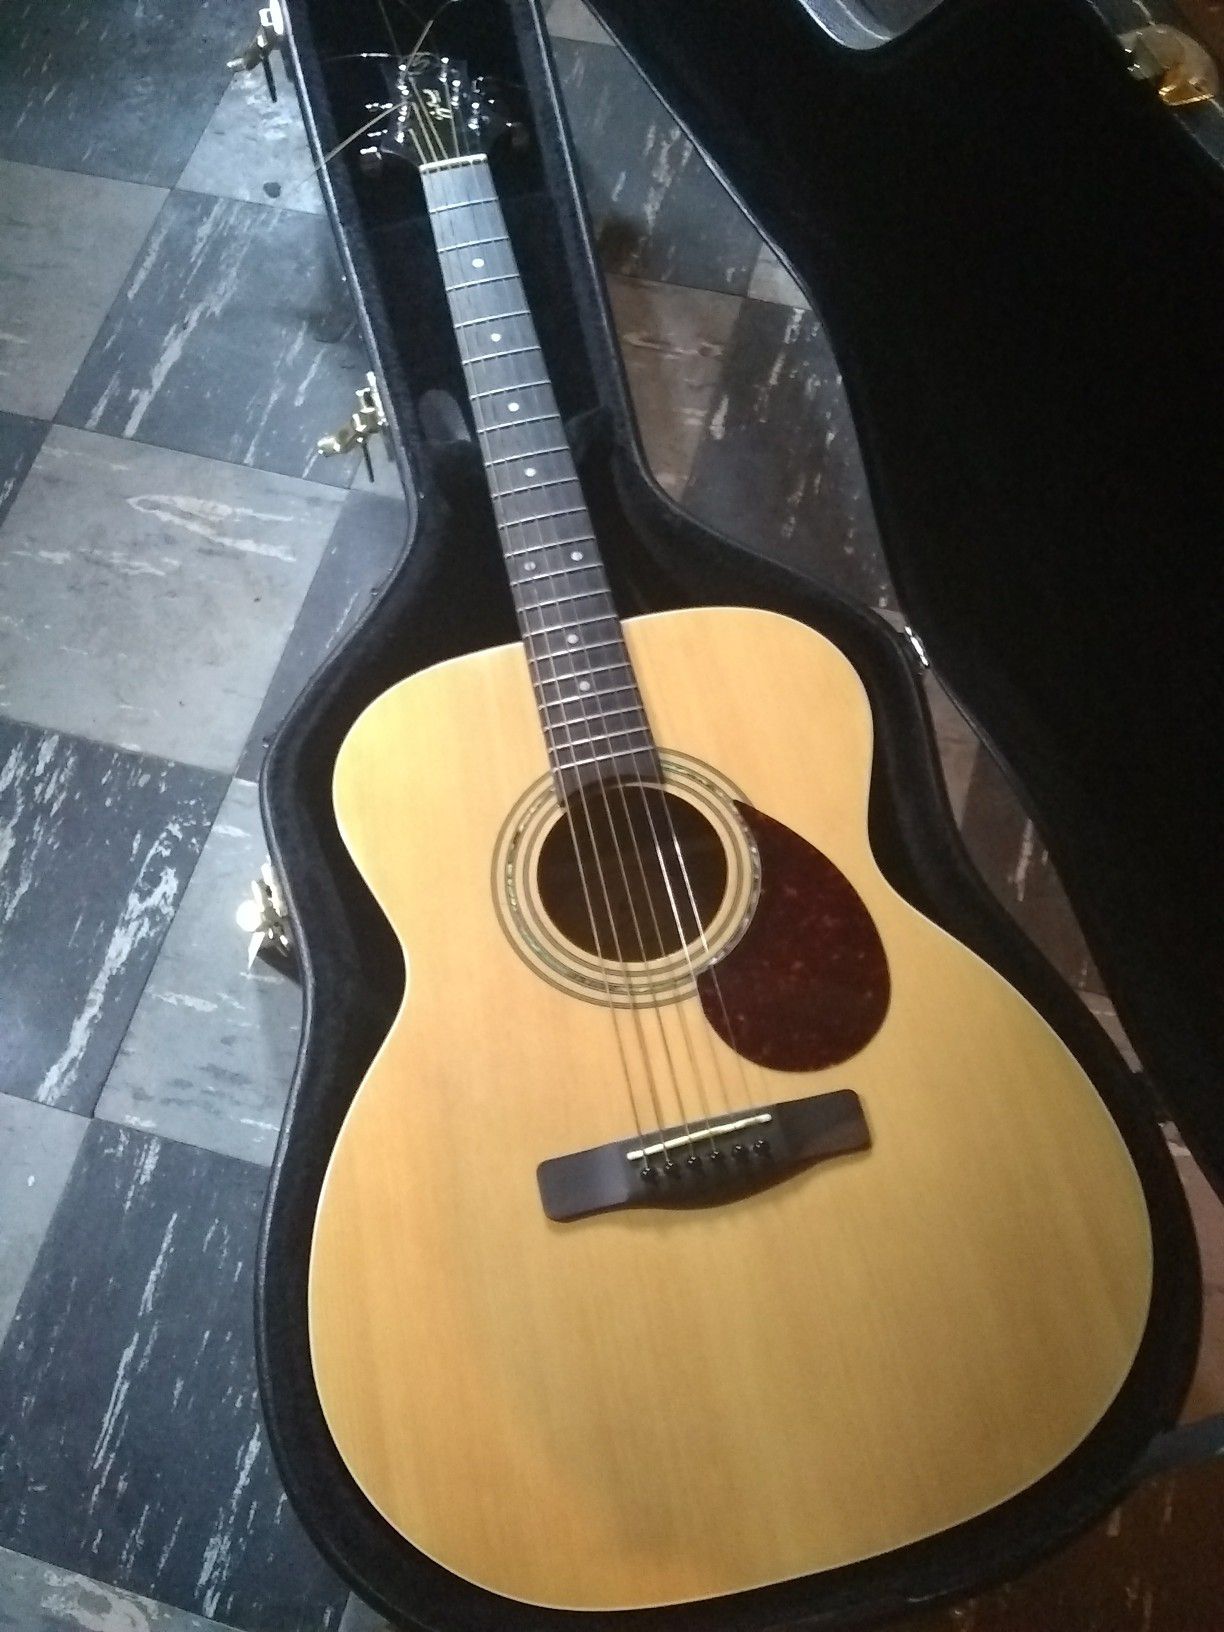 Samich Acoustic Guitar like new